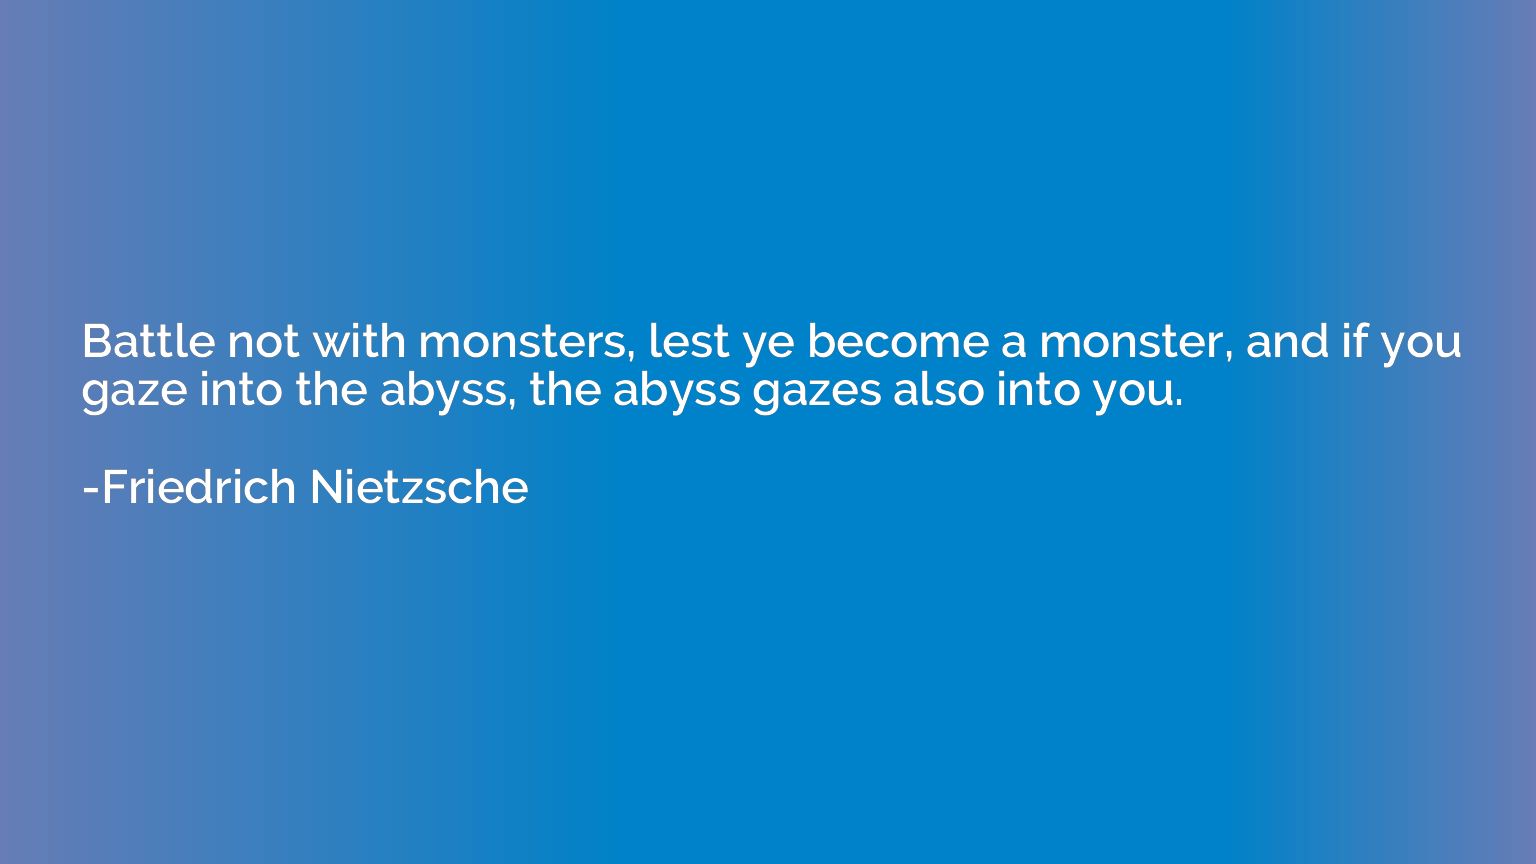 Battle not with monsters, lest ye become a monster, and if y